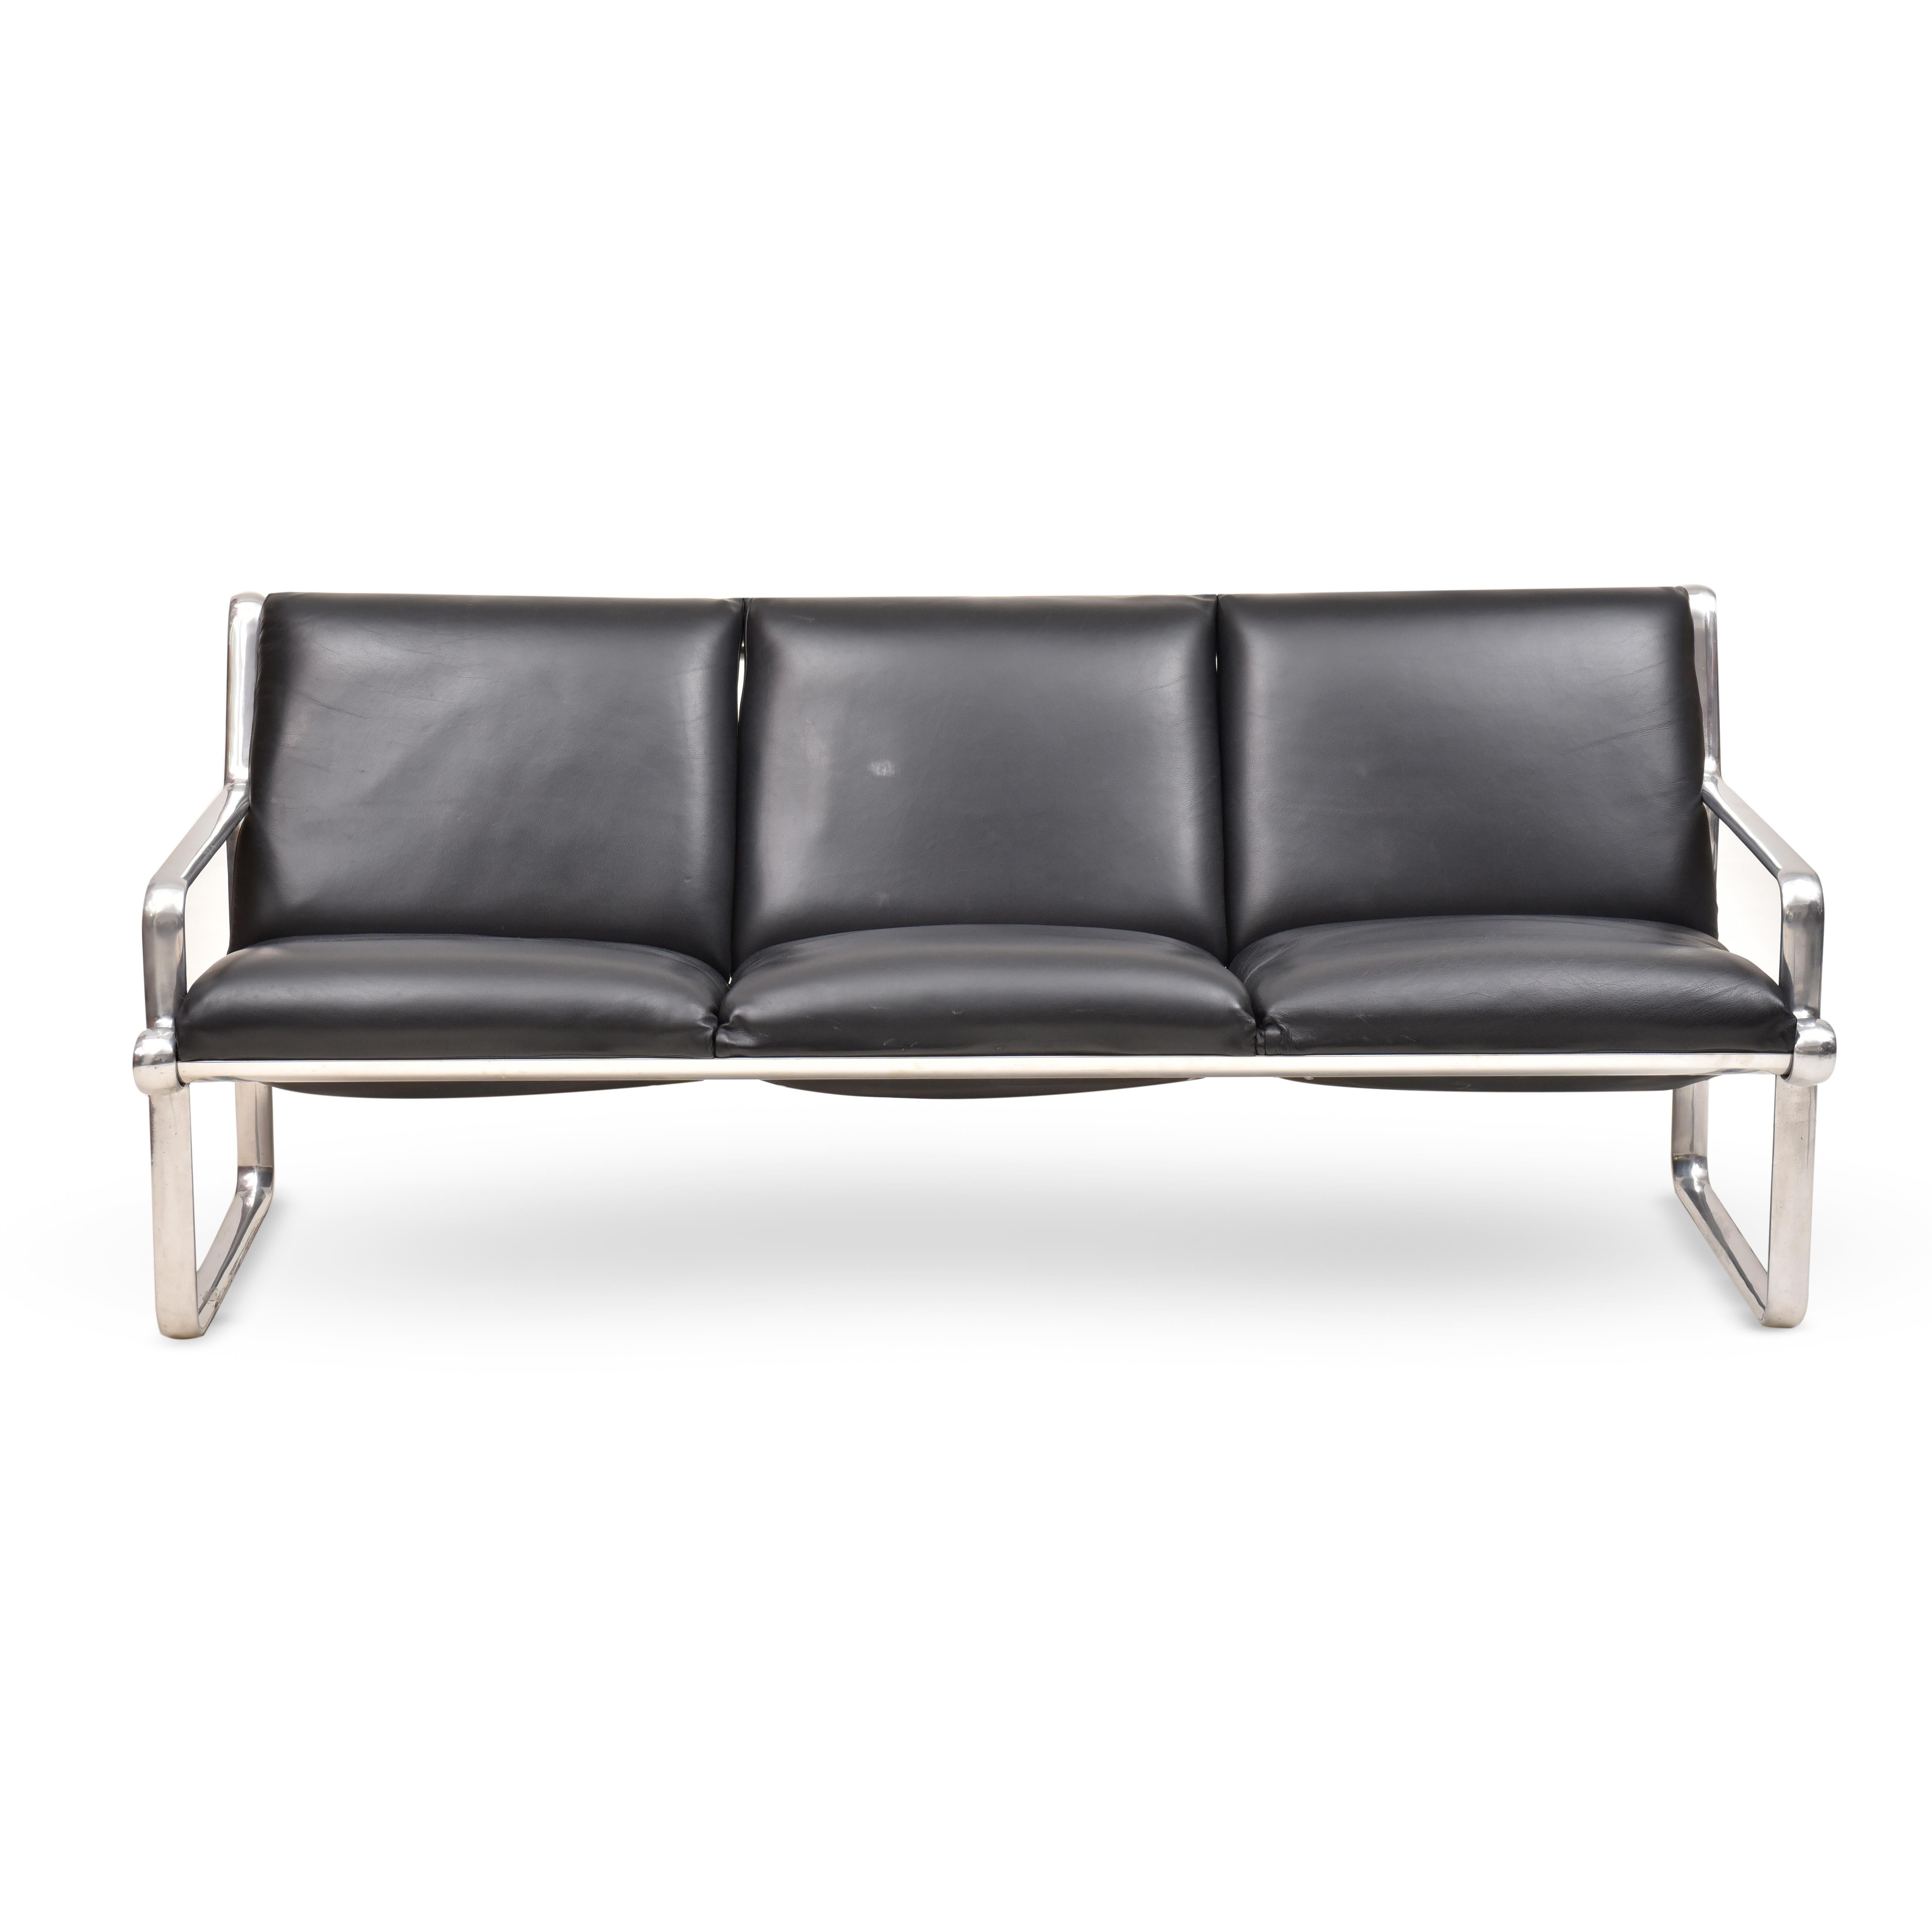 Hanna Sofa by Forma, Florence Knoll, 1975s In Good Condition For Sale In Sao Paulo, SP